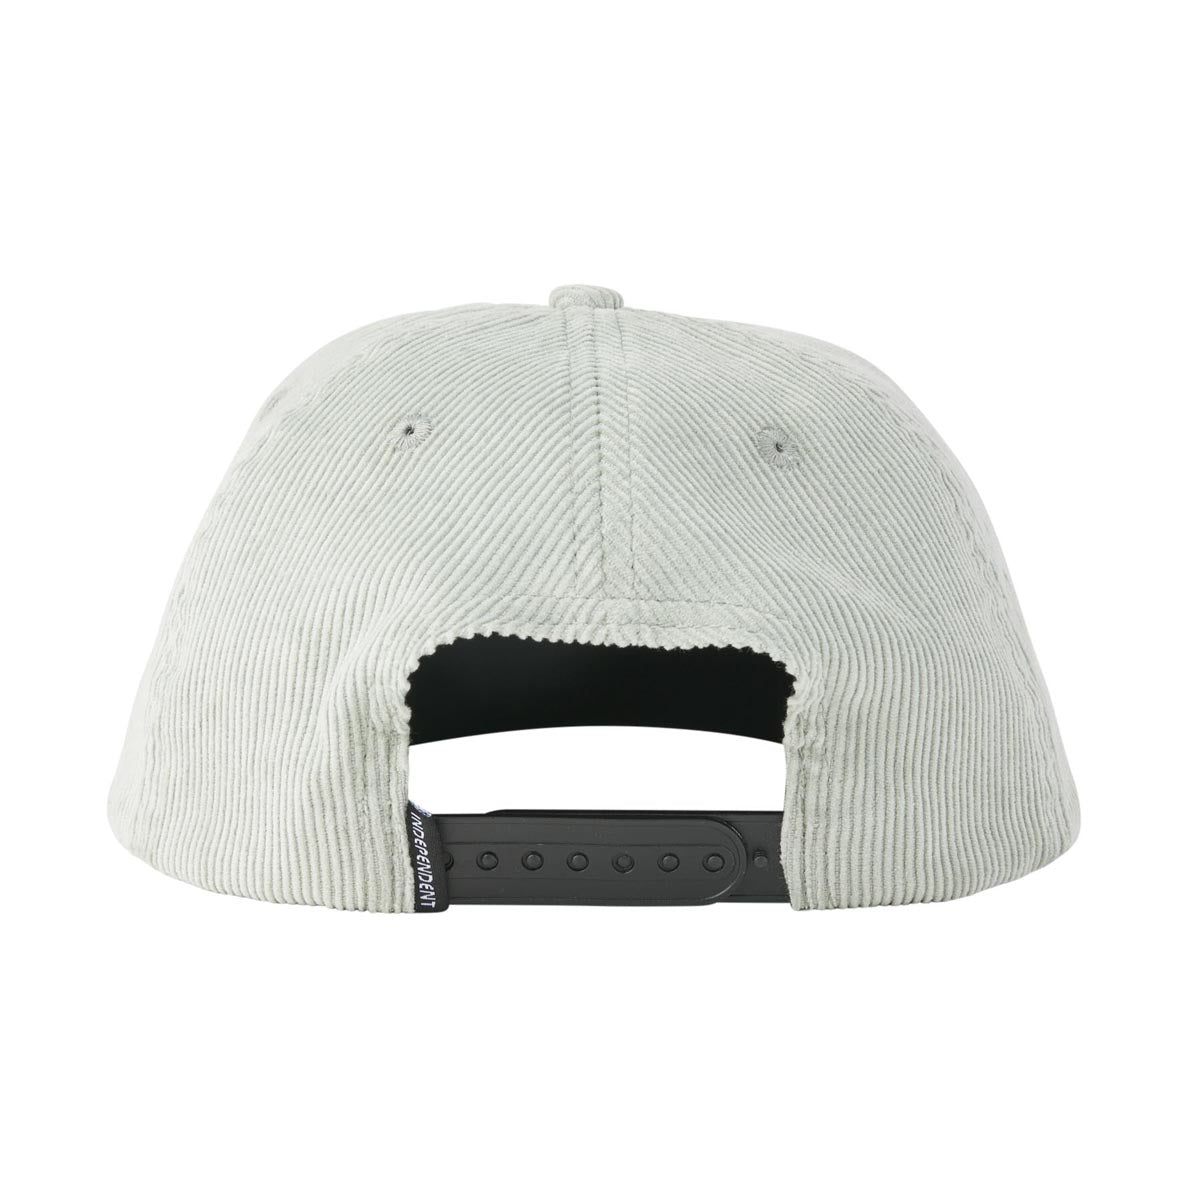 Independent Beacon Snapback Unstructured Hat - Grey image 3